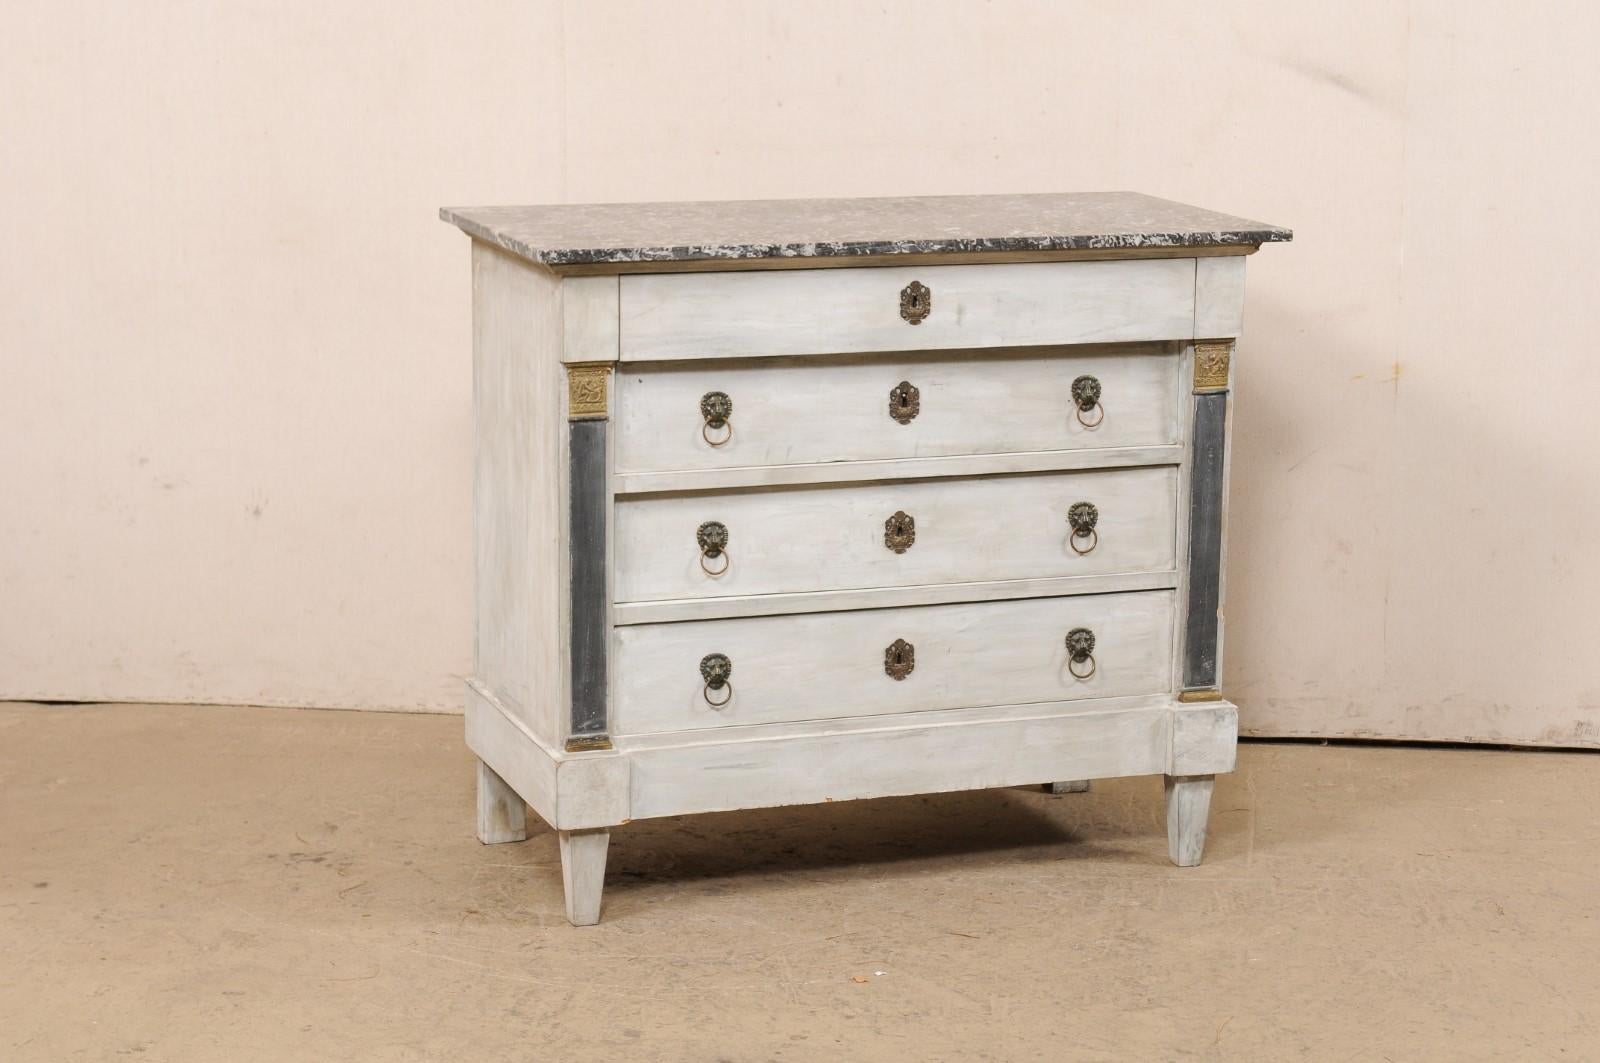 A French four-drawer Neoclassic commode with its original marble top from the 19th century. This antique chest from France retains its original marble top which sits atop a Neoclassical case that has been designed in clean/linear lines, and raised